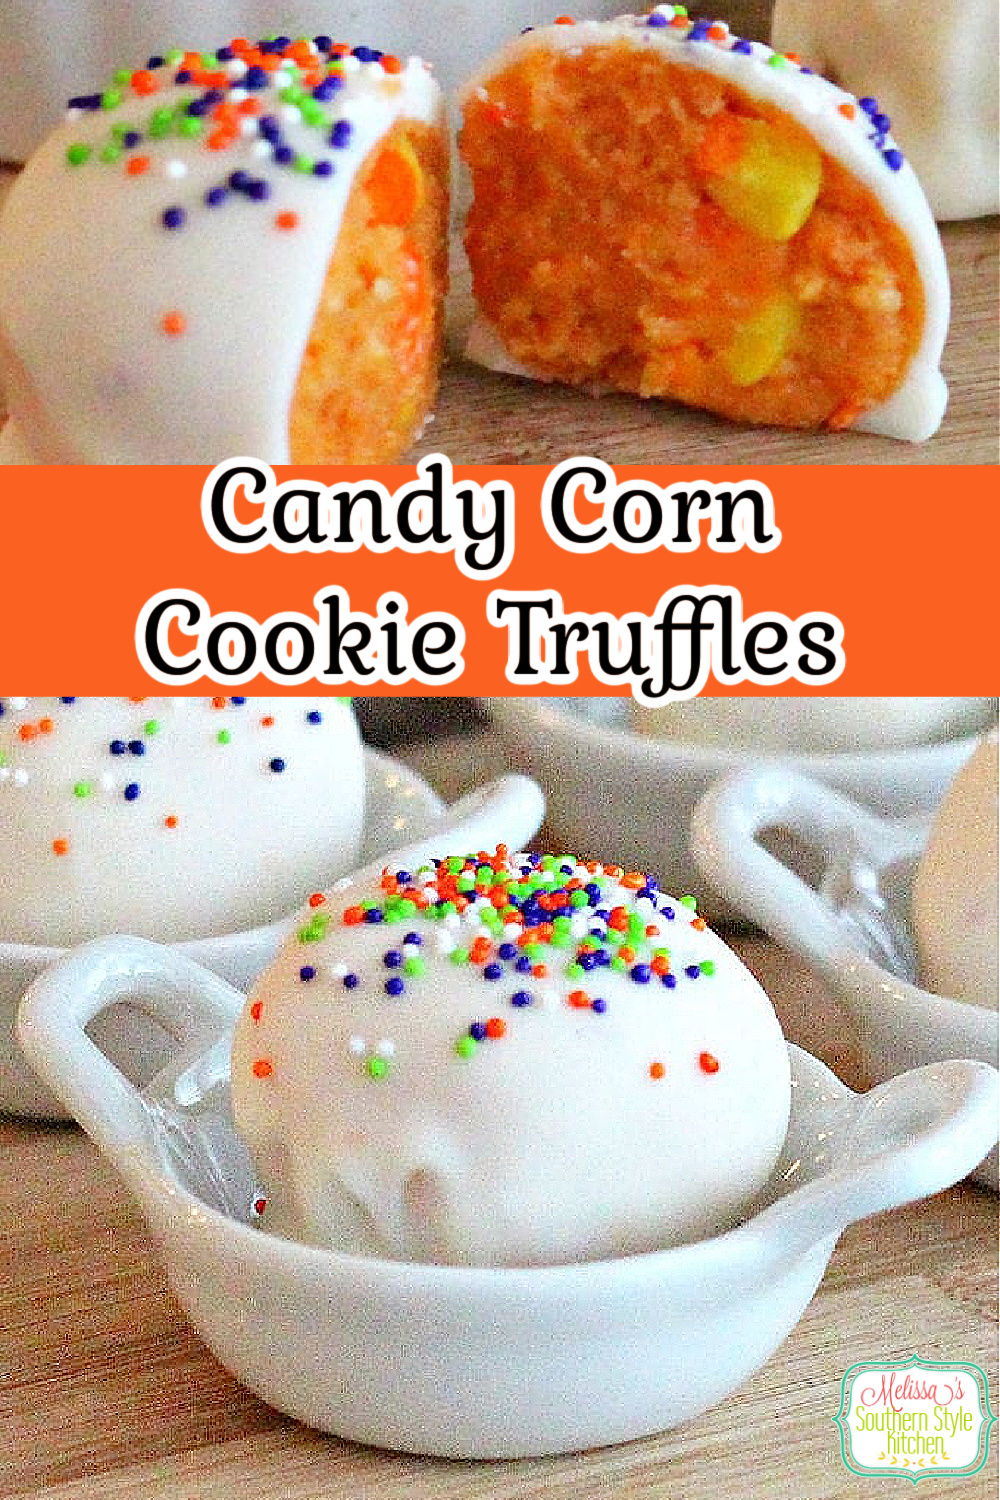 These two-bite Candy Corn Cookie Truffles require no baking at all #candycorn #candycorncookies #cookies #truffles #candycorntruffles #desserts #falldesserts #dessertfoodrecipes #trufflerecipes #fall #southernfood #southernrecipes